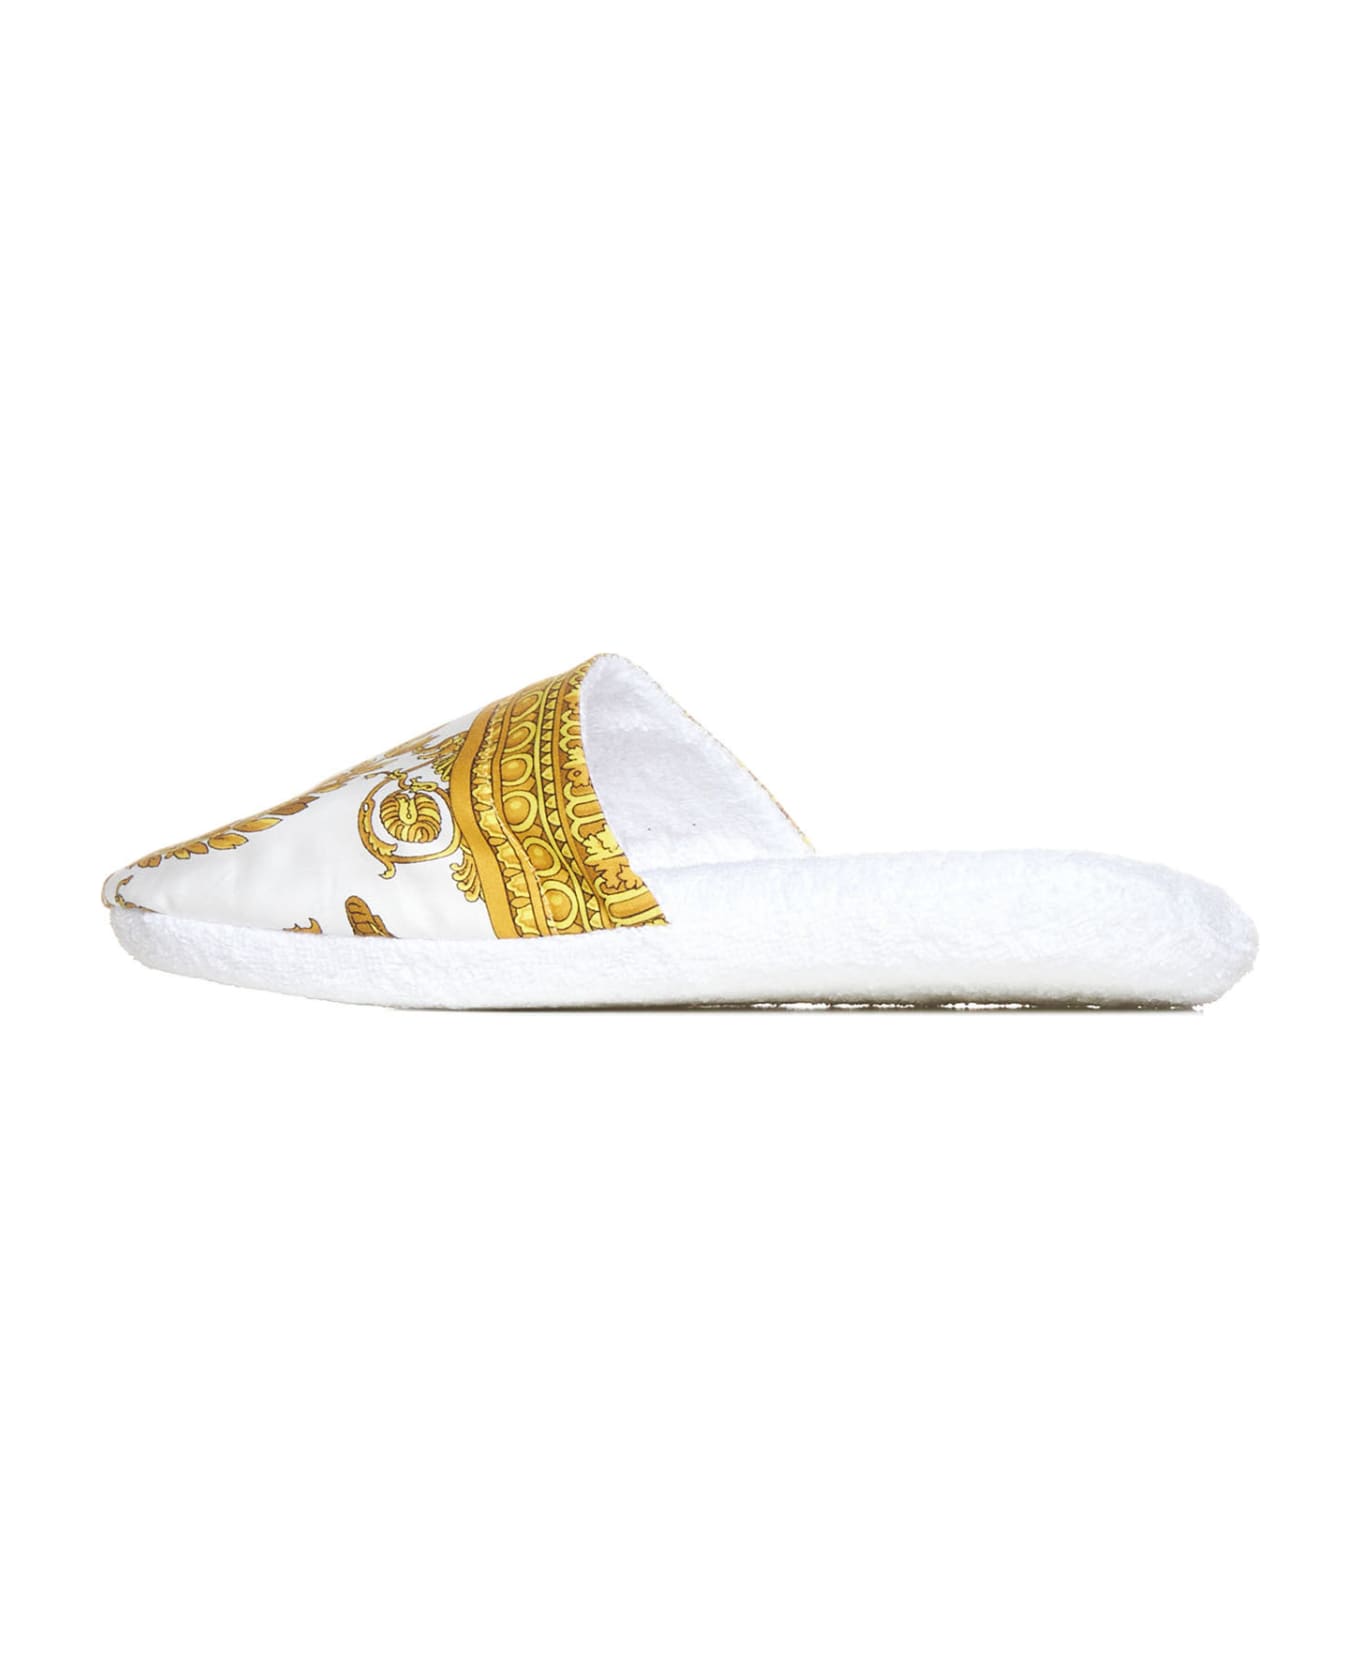 Versace Shoes - WHITE/YELLOW